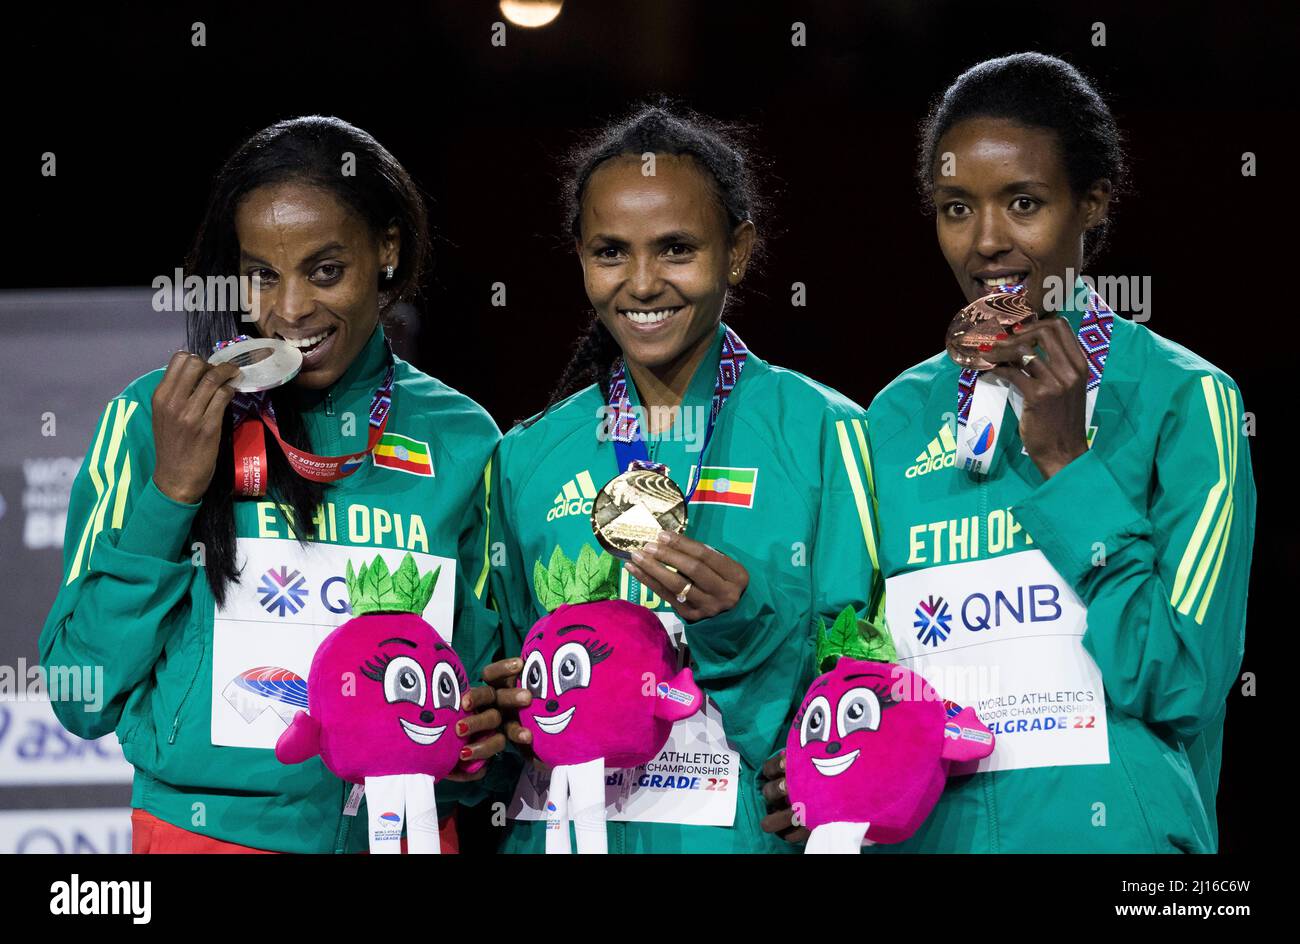 Belgrade, Serbia, 19th March 2022. Gudaf Tsegay of Ethiopia, Hirut Meshesha of Ethiopia, Axumawit Embaye of Ethiopia posing with medals during the medal ceremony during the World Athletics Indoor Championships Belgrade 2022 - Press Conference in Belgrade, Serbia. March 19, 2022. Credit: Nikola Krstic/Alamy Stock Photo